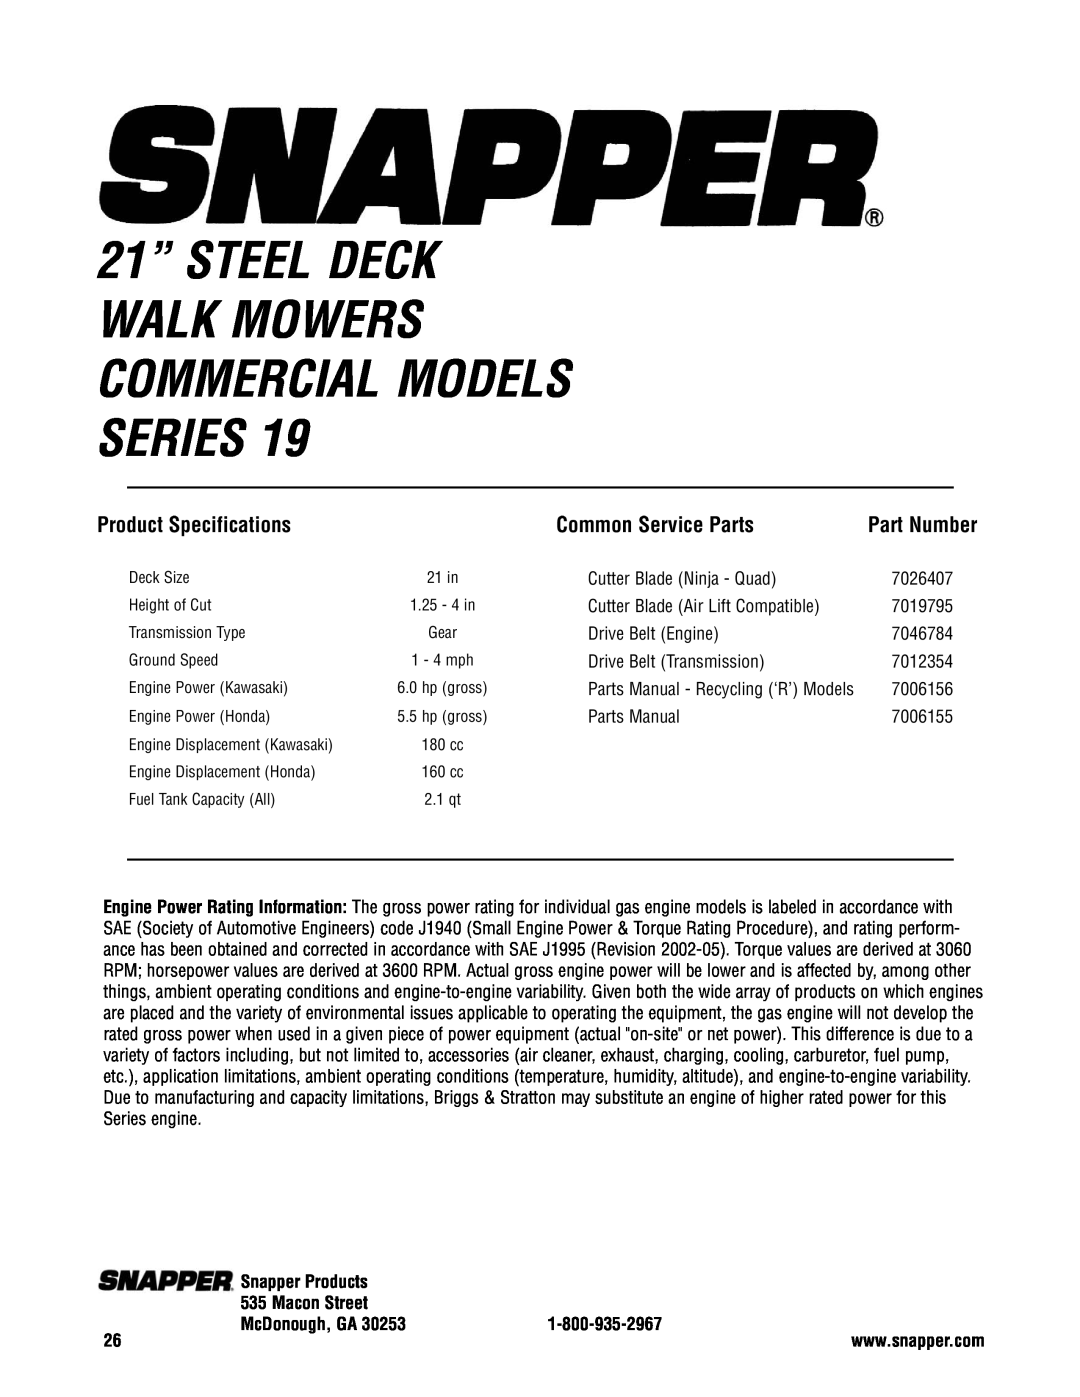 Snapper CP216019KWV, CRP216019KWV, CP215519HV Product Specifications, Common Service Parts, Part Number, Snapper Products 